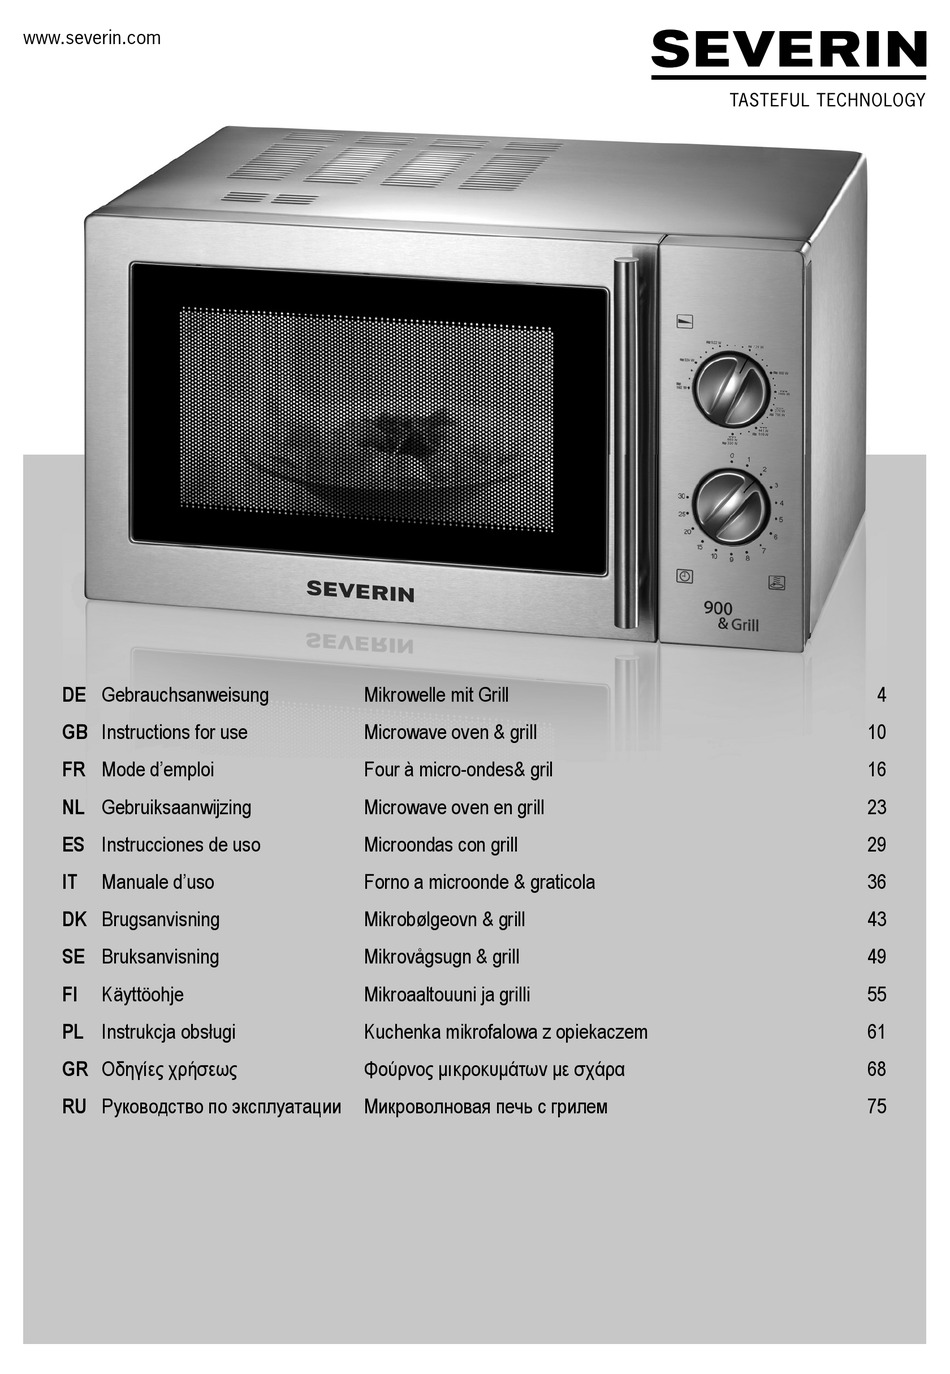 SEVERIN MW 7849 INSTRUCTIONS FOR USE MANUAL Pdf Download | ManualsLib